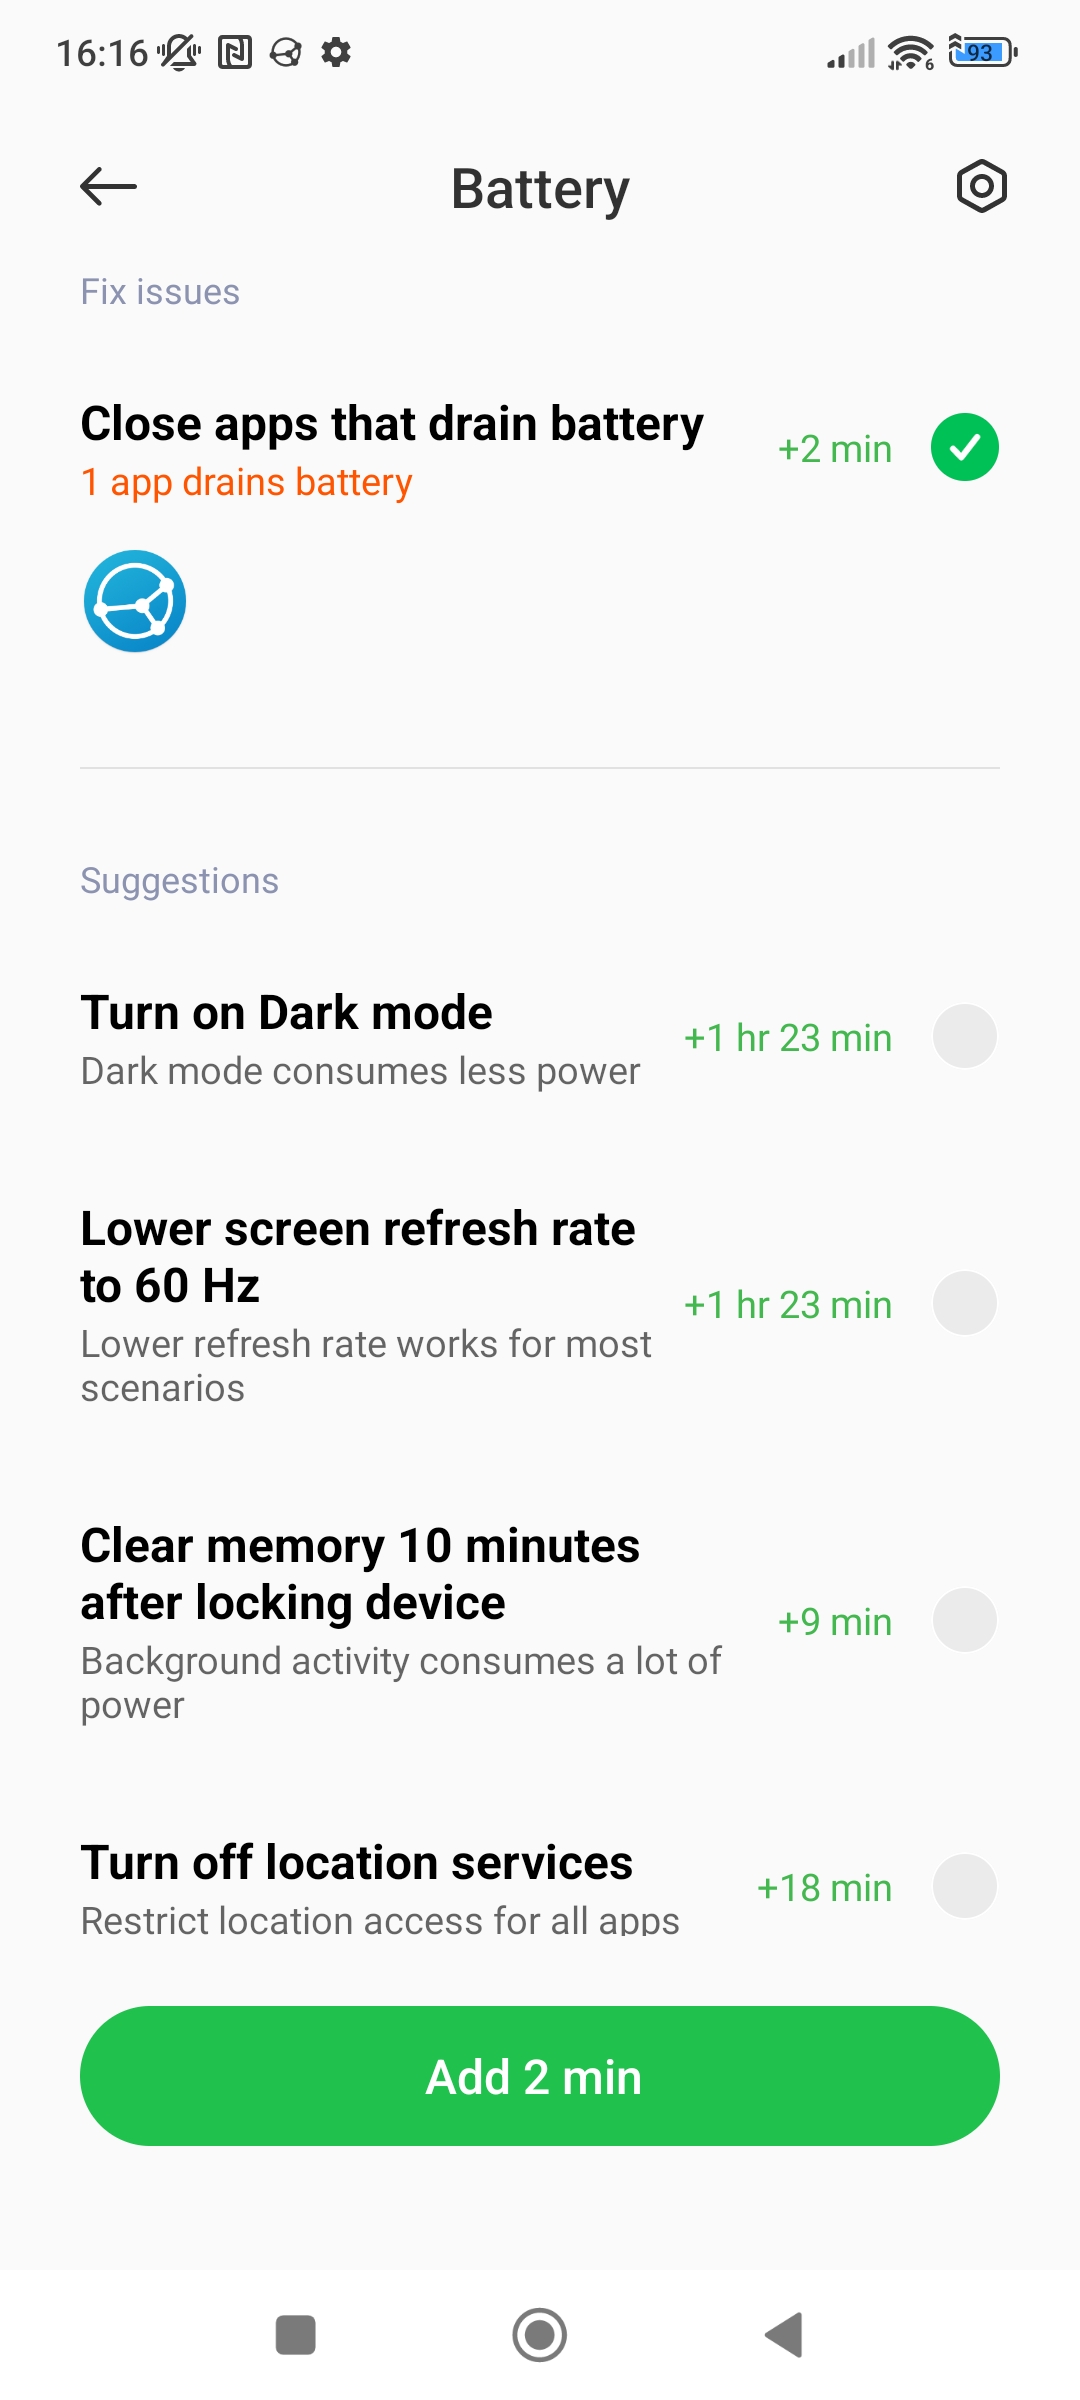 MIUI Battery Suggestions